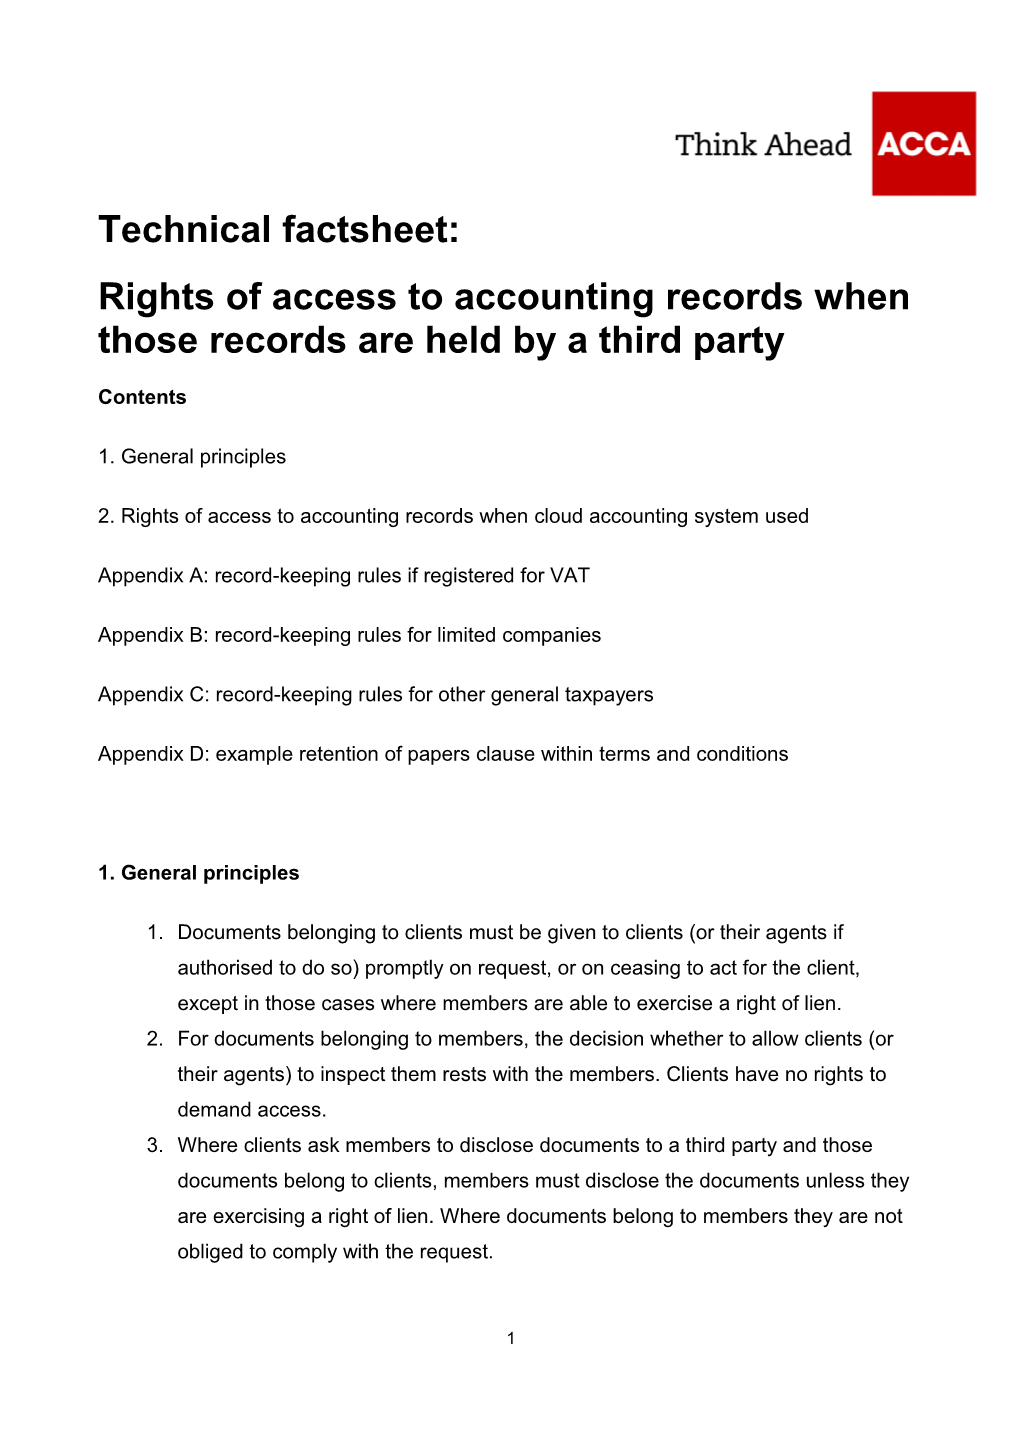 Rights of Access to Accounting Records When Those Records Are Held by a Third Party